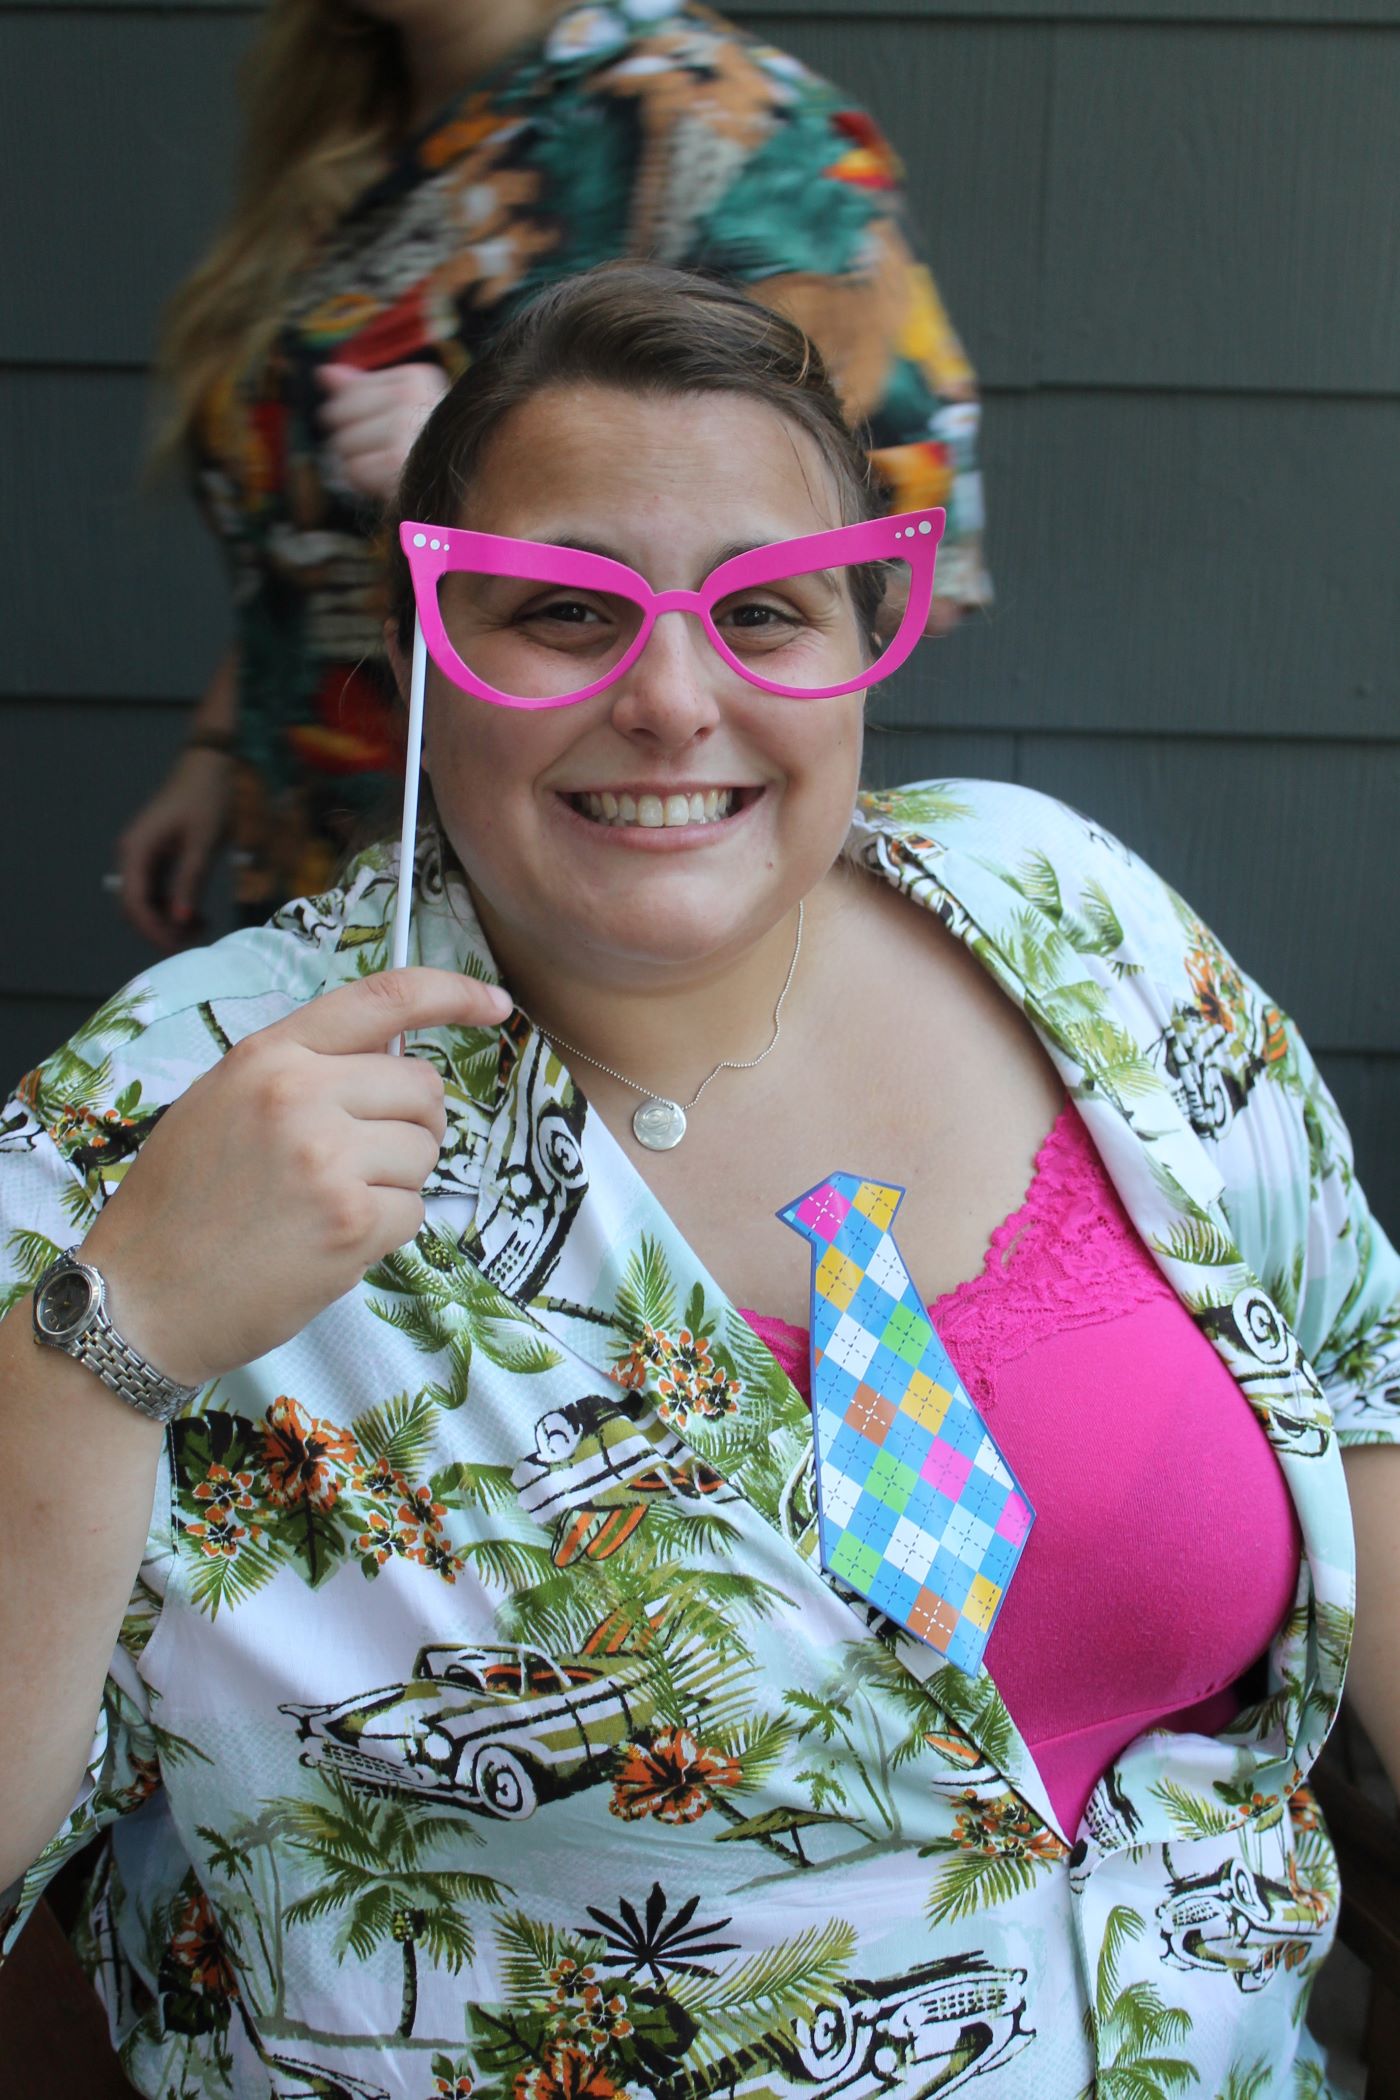 Danielle at summer party with pink glasses